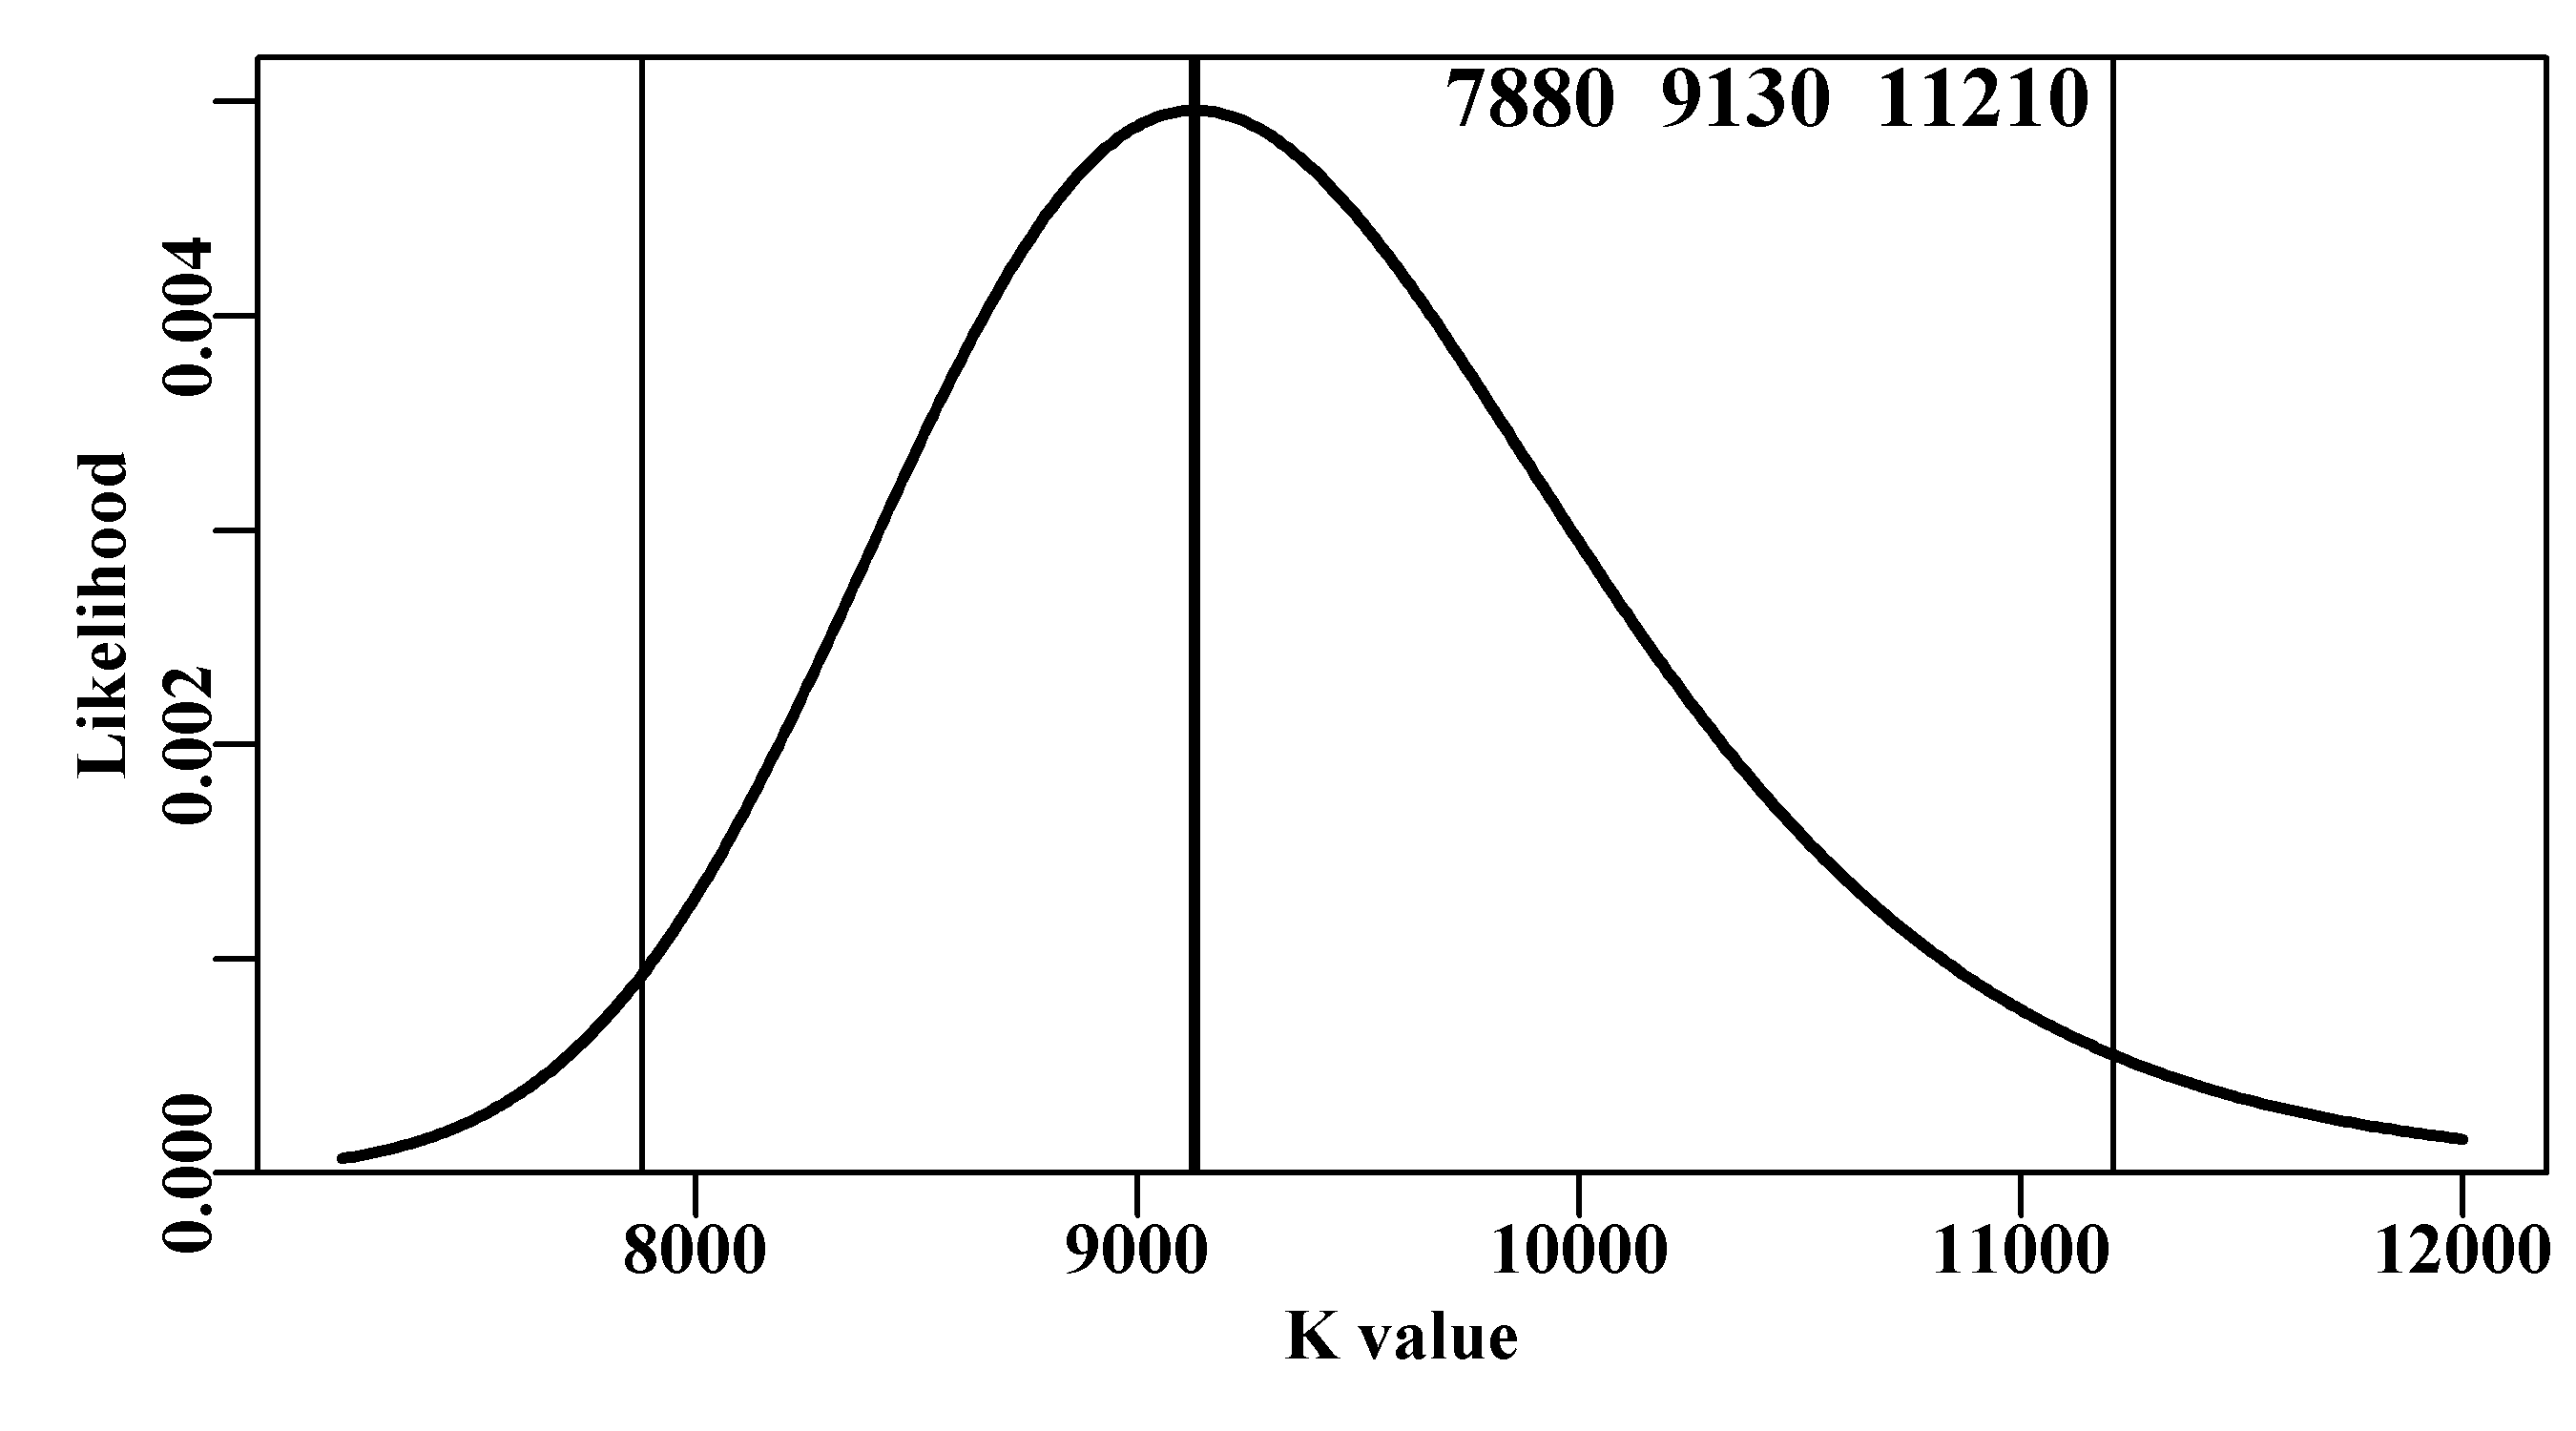 A likelihood profile for the K parameter from the Schaefer surplus production model fitted to the abdat data-set. In this case the -ve log-likelihoods have been back-transformed to likelihoods and scaled to sum to 1.0. The vertical lines are the approximate 95% confidence bounds around the mean. The top three numbers are the bounds and estimated optimum.